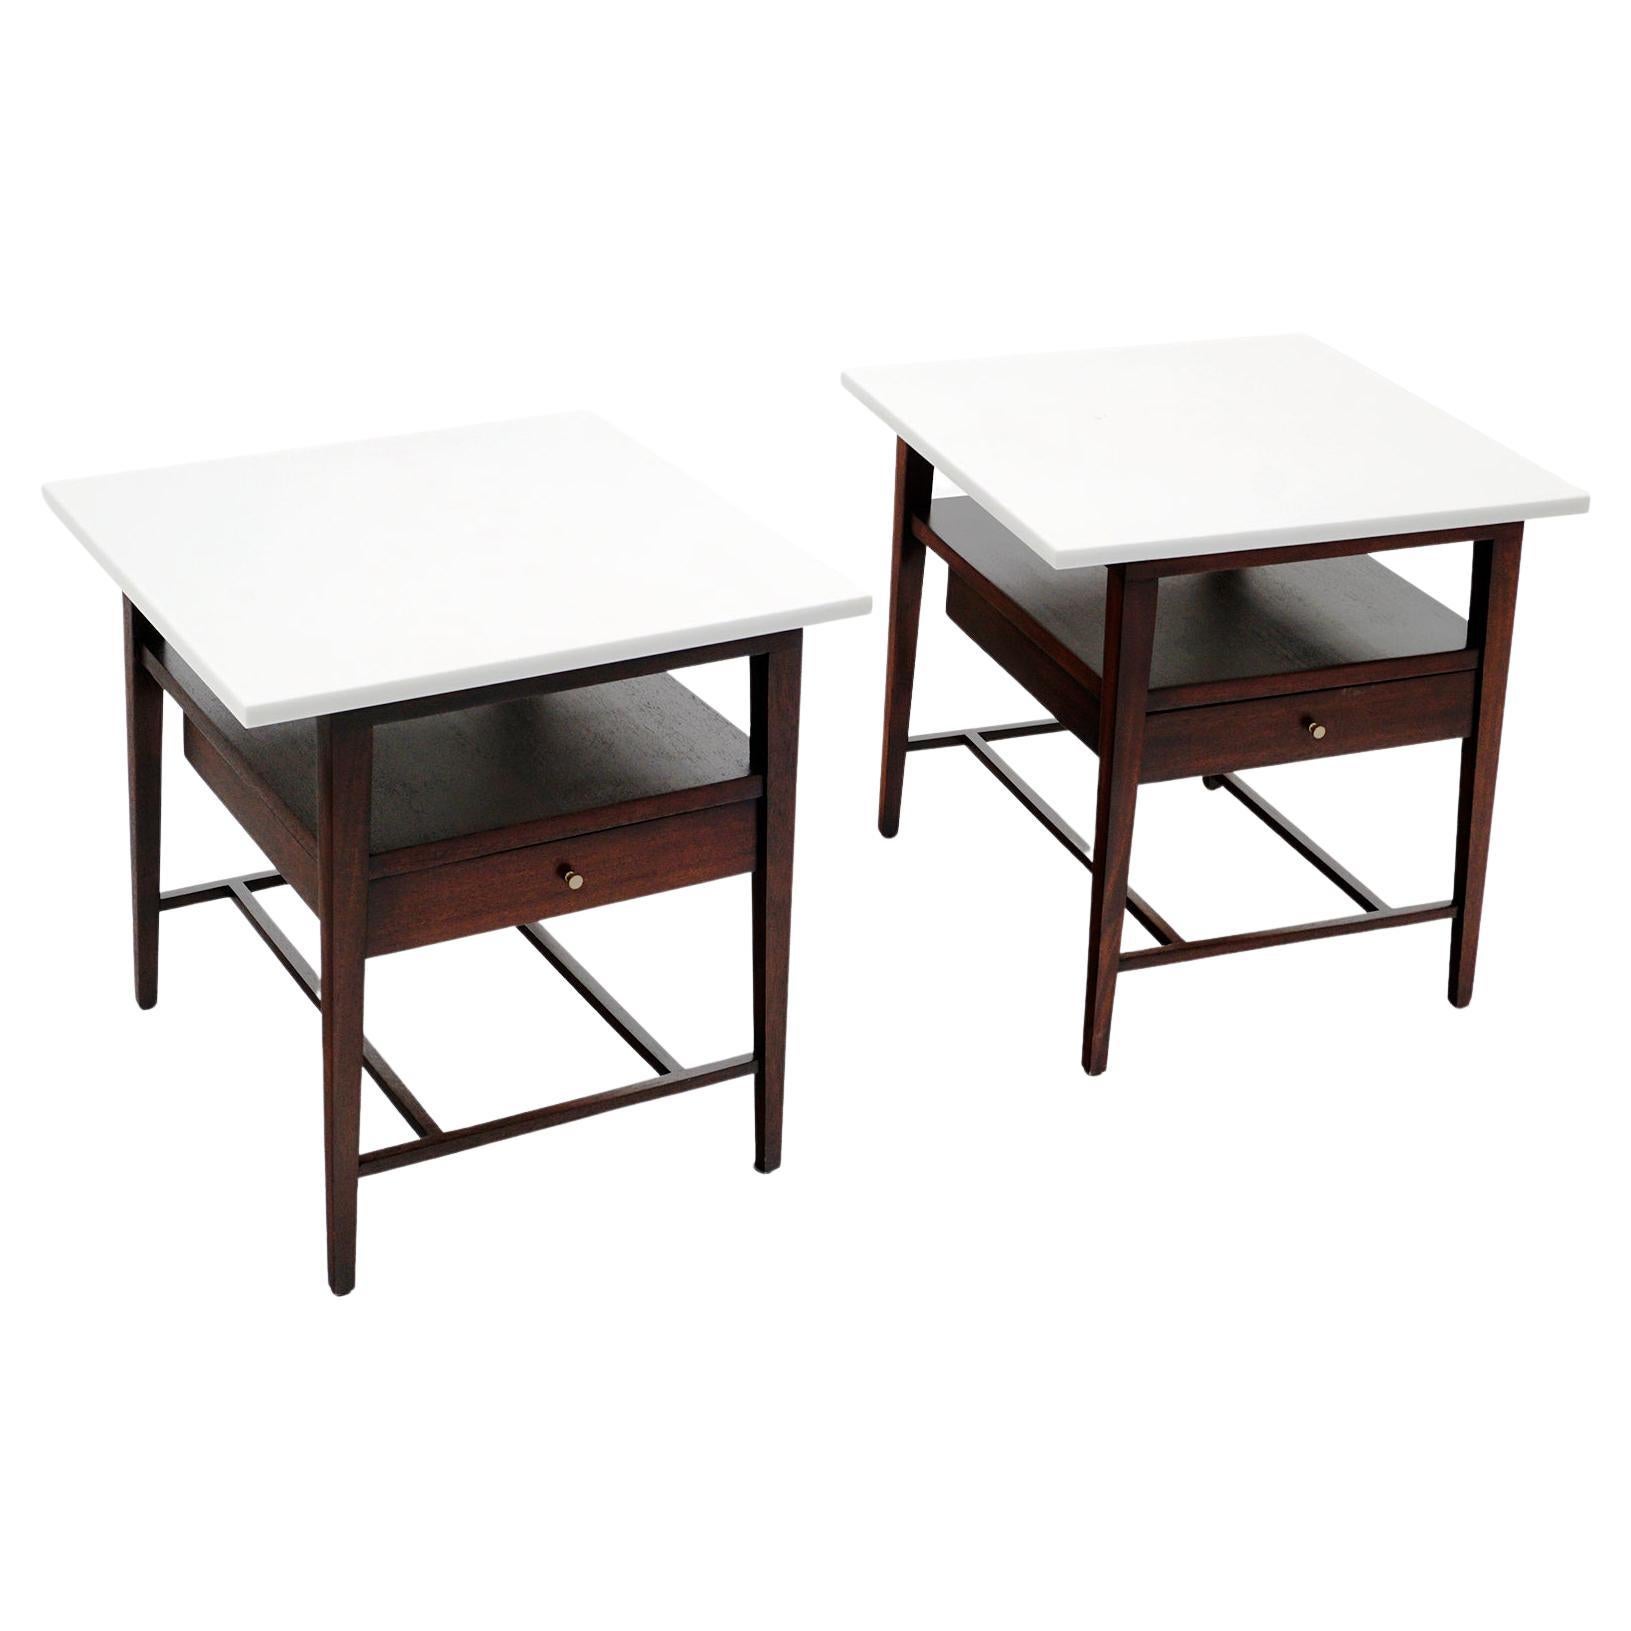 Pair Night Stands by Paul McCobb for Calvin, Mahogany w/ White Milk Glass Tops